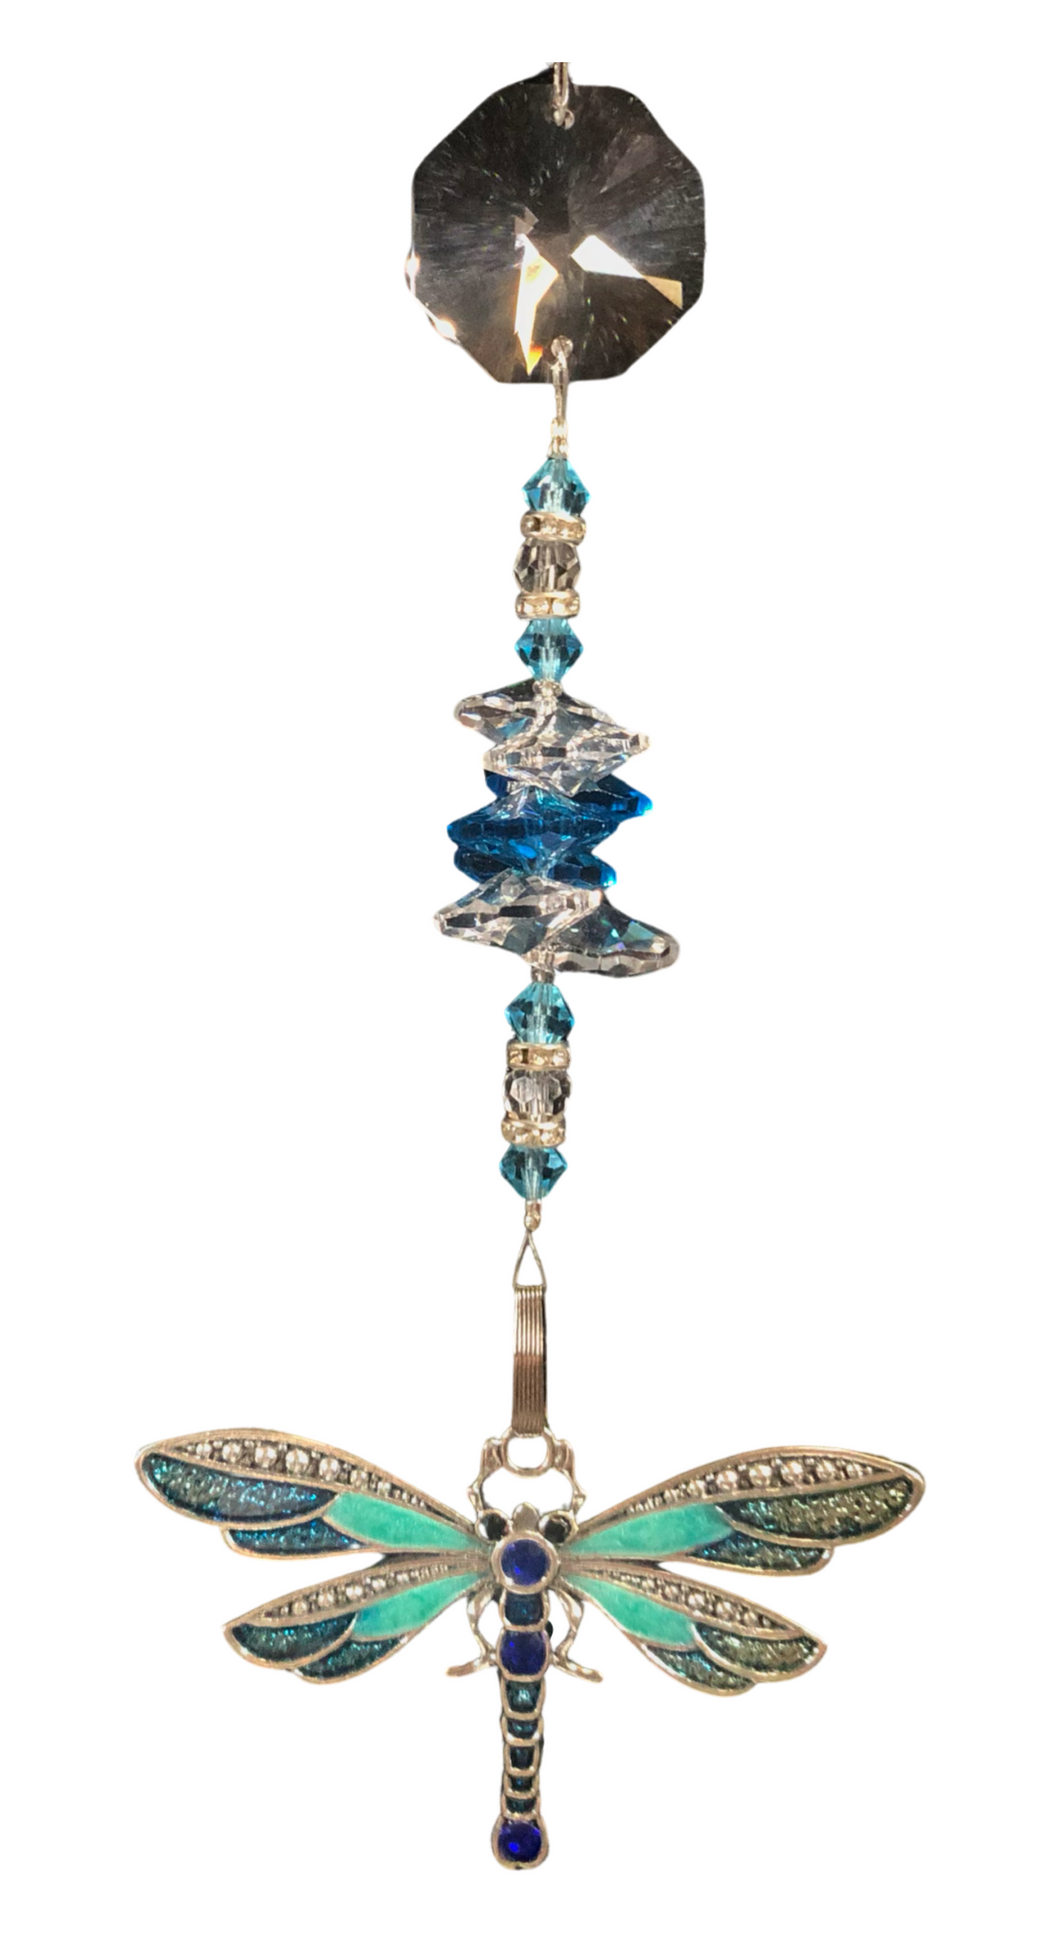 Dragonfly Blue suncatcher which is decorated with crystals and Turquoise gemstones